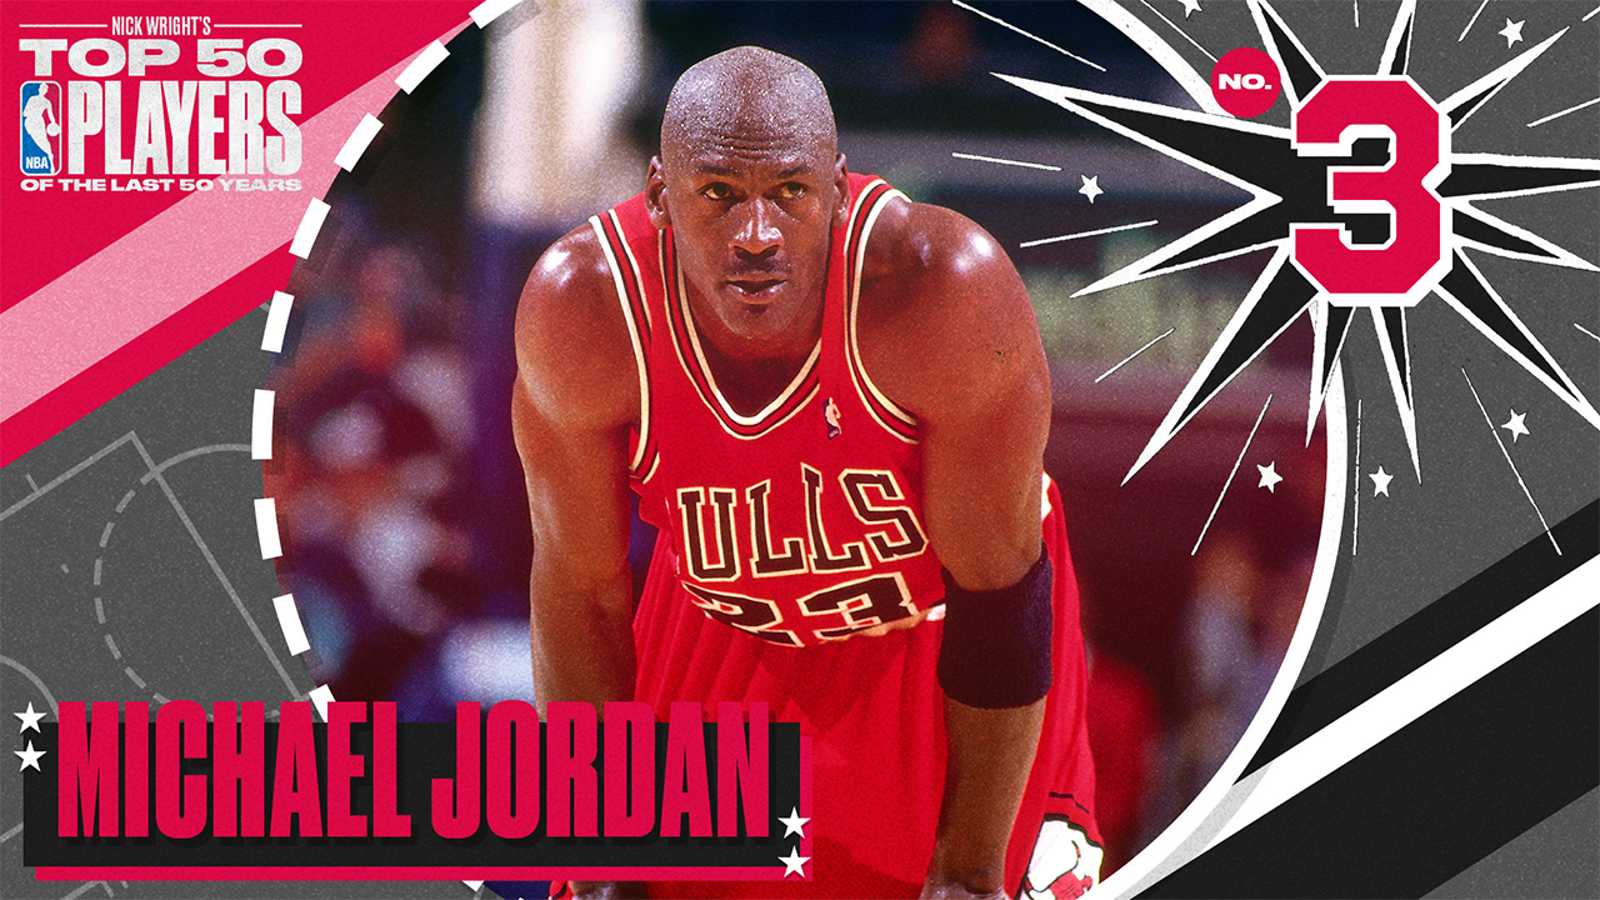 Michael Jordan is No. 3 on Nick Wright's Top 50 Players of the Last 50 Years